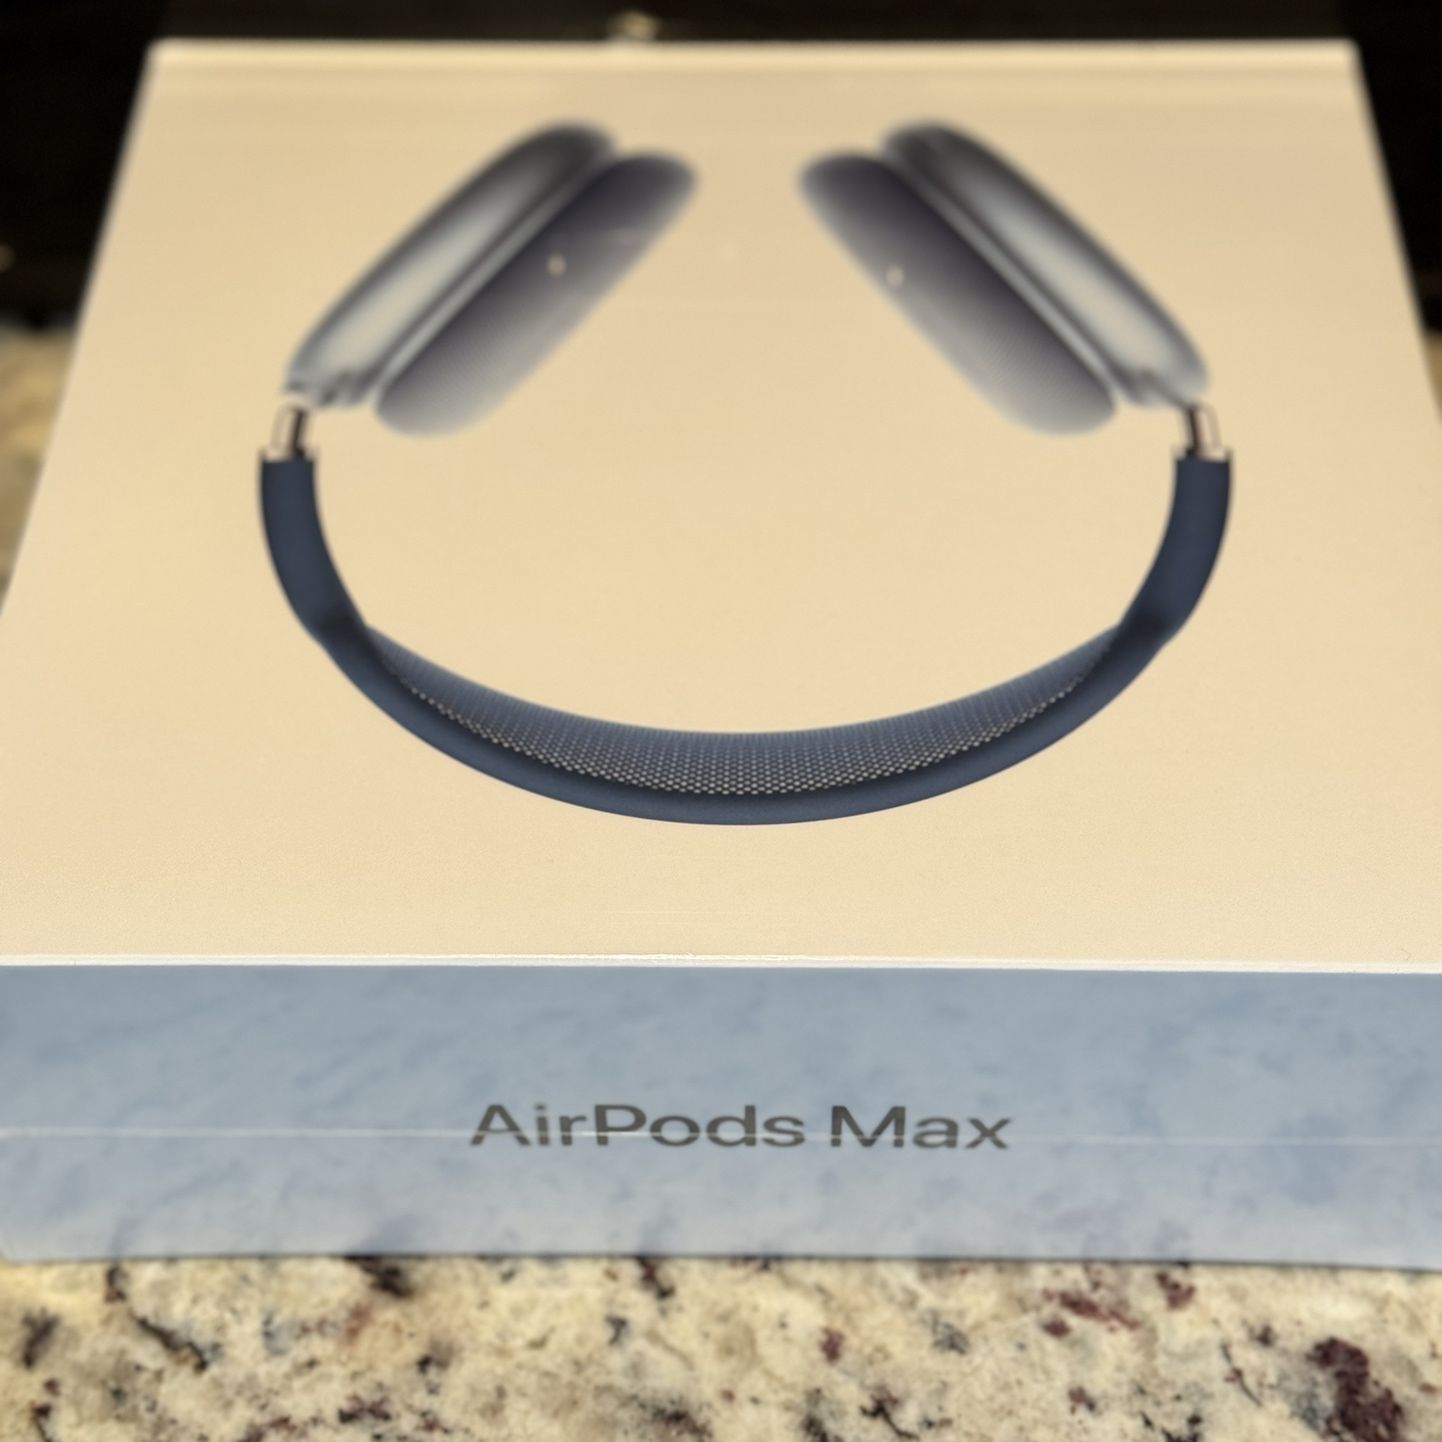 ⭐️ BRAND NEW ⭐️ APPLE AIRPODS MAX❗️Sky Blue Color!